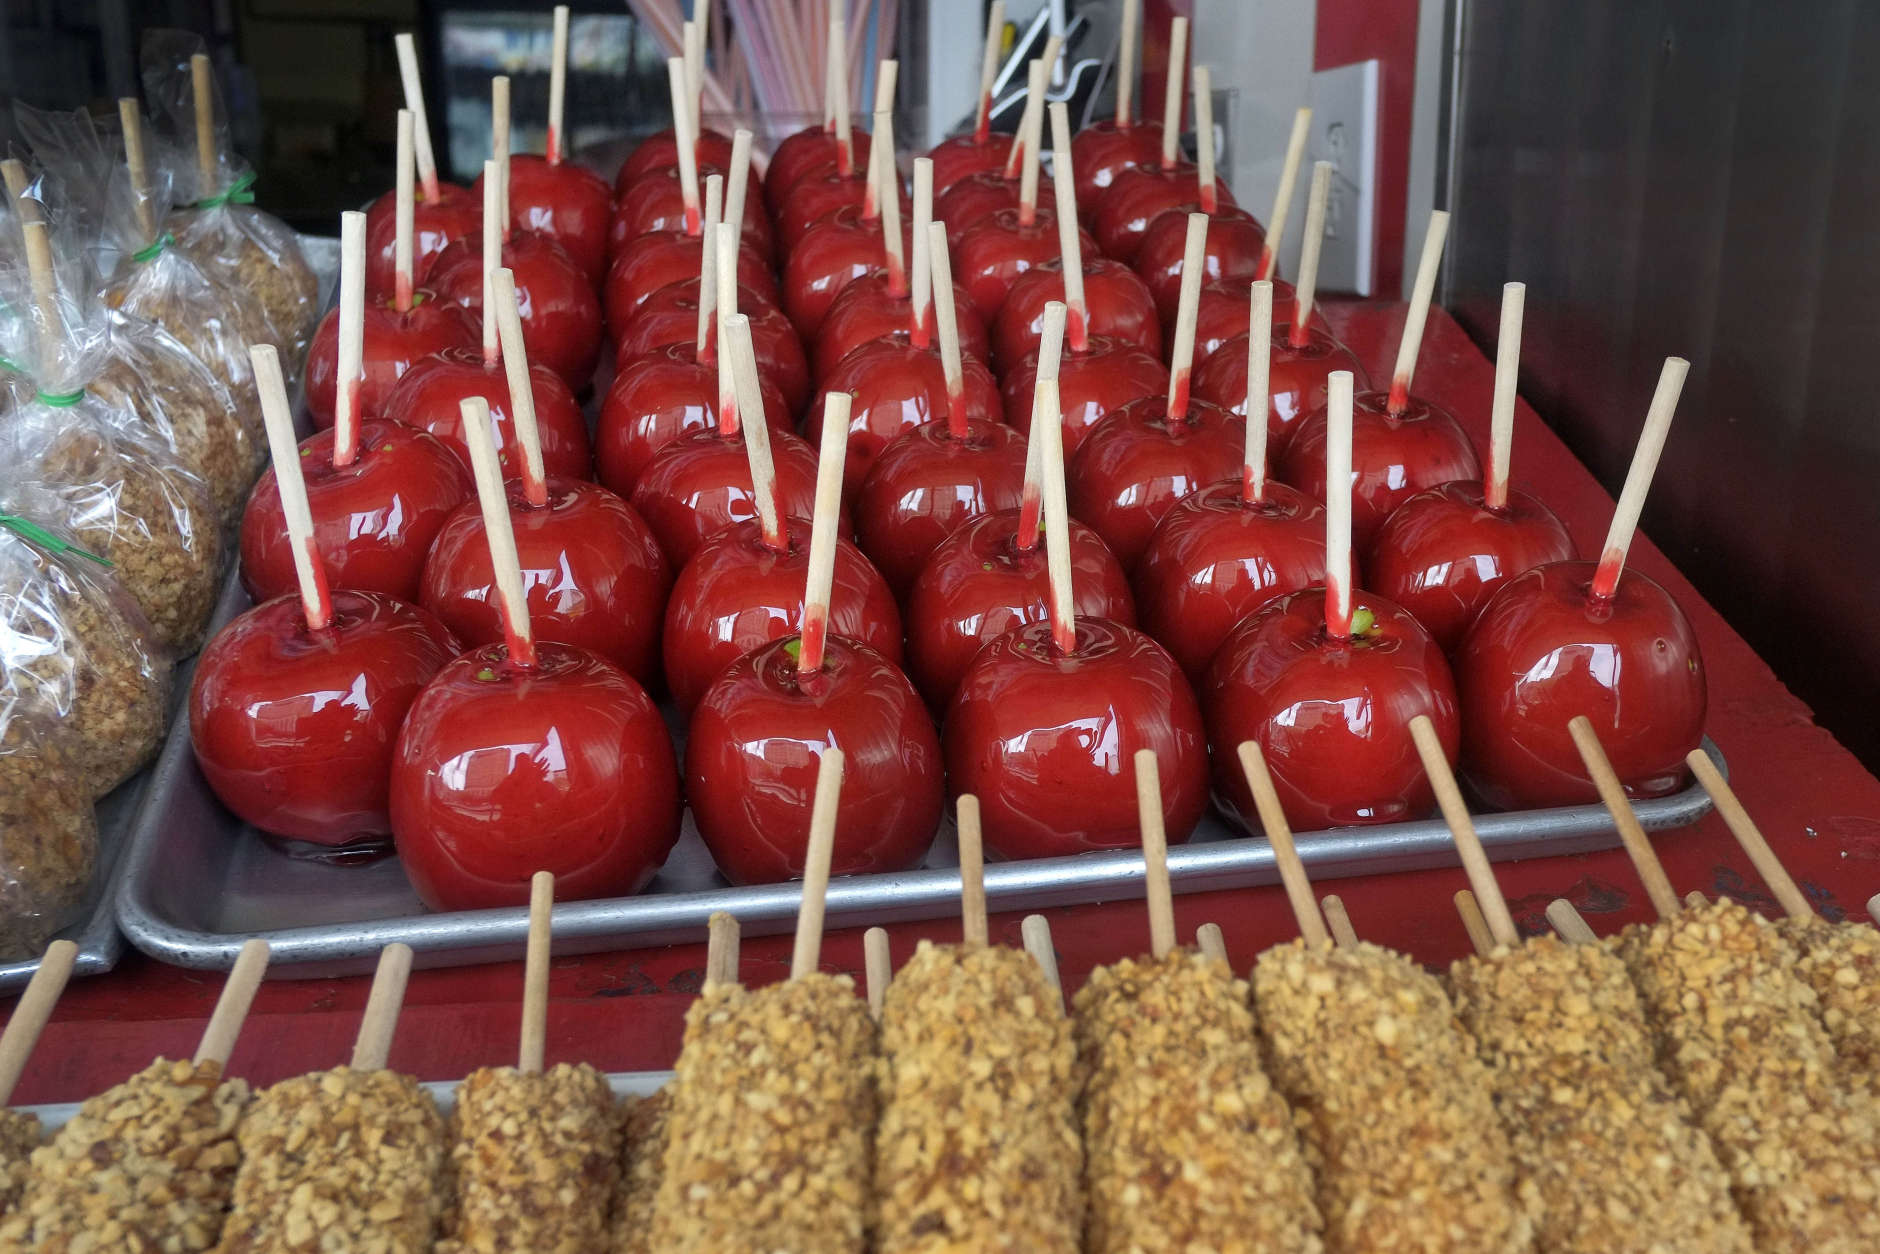 FILE - In this file photo of May 23, 2013, a tray of candy apples is displayed at Williams Candy at Coney Island  in the Brooklyn borough of New York.Eight months after Superstorm Sandy hit New York City, Coney Islands rides, eateries and beach are getting plenty of visitors, and there are even a few new attractions like a carousel and a store for fans of the Nets basektball team. (AP Photo/Mark Lennihan, File)